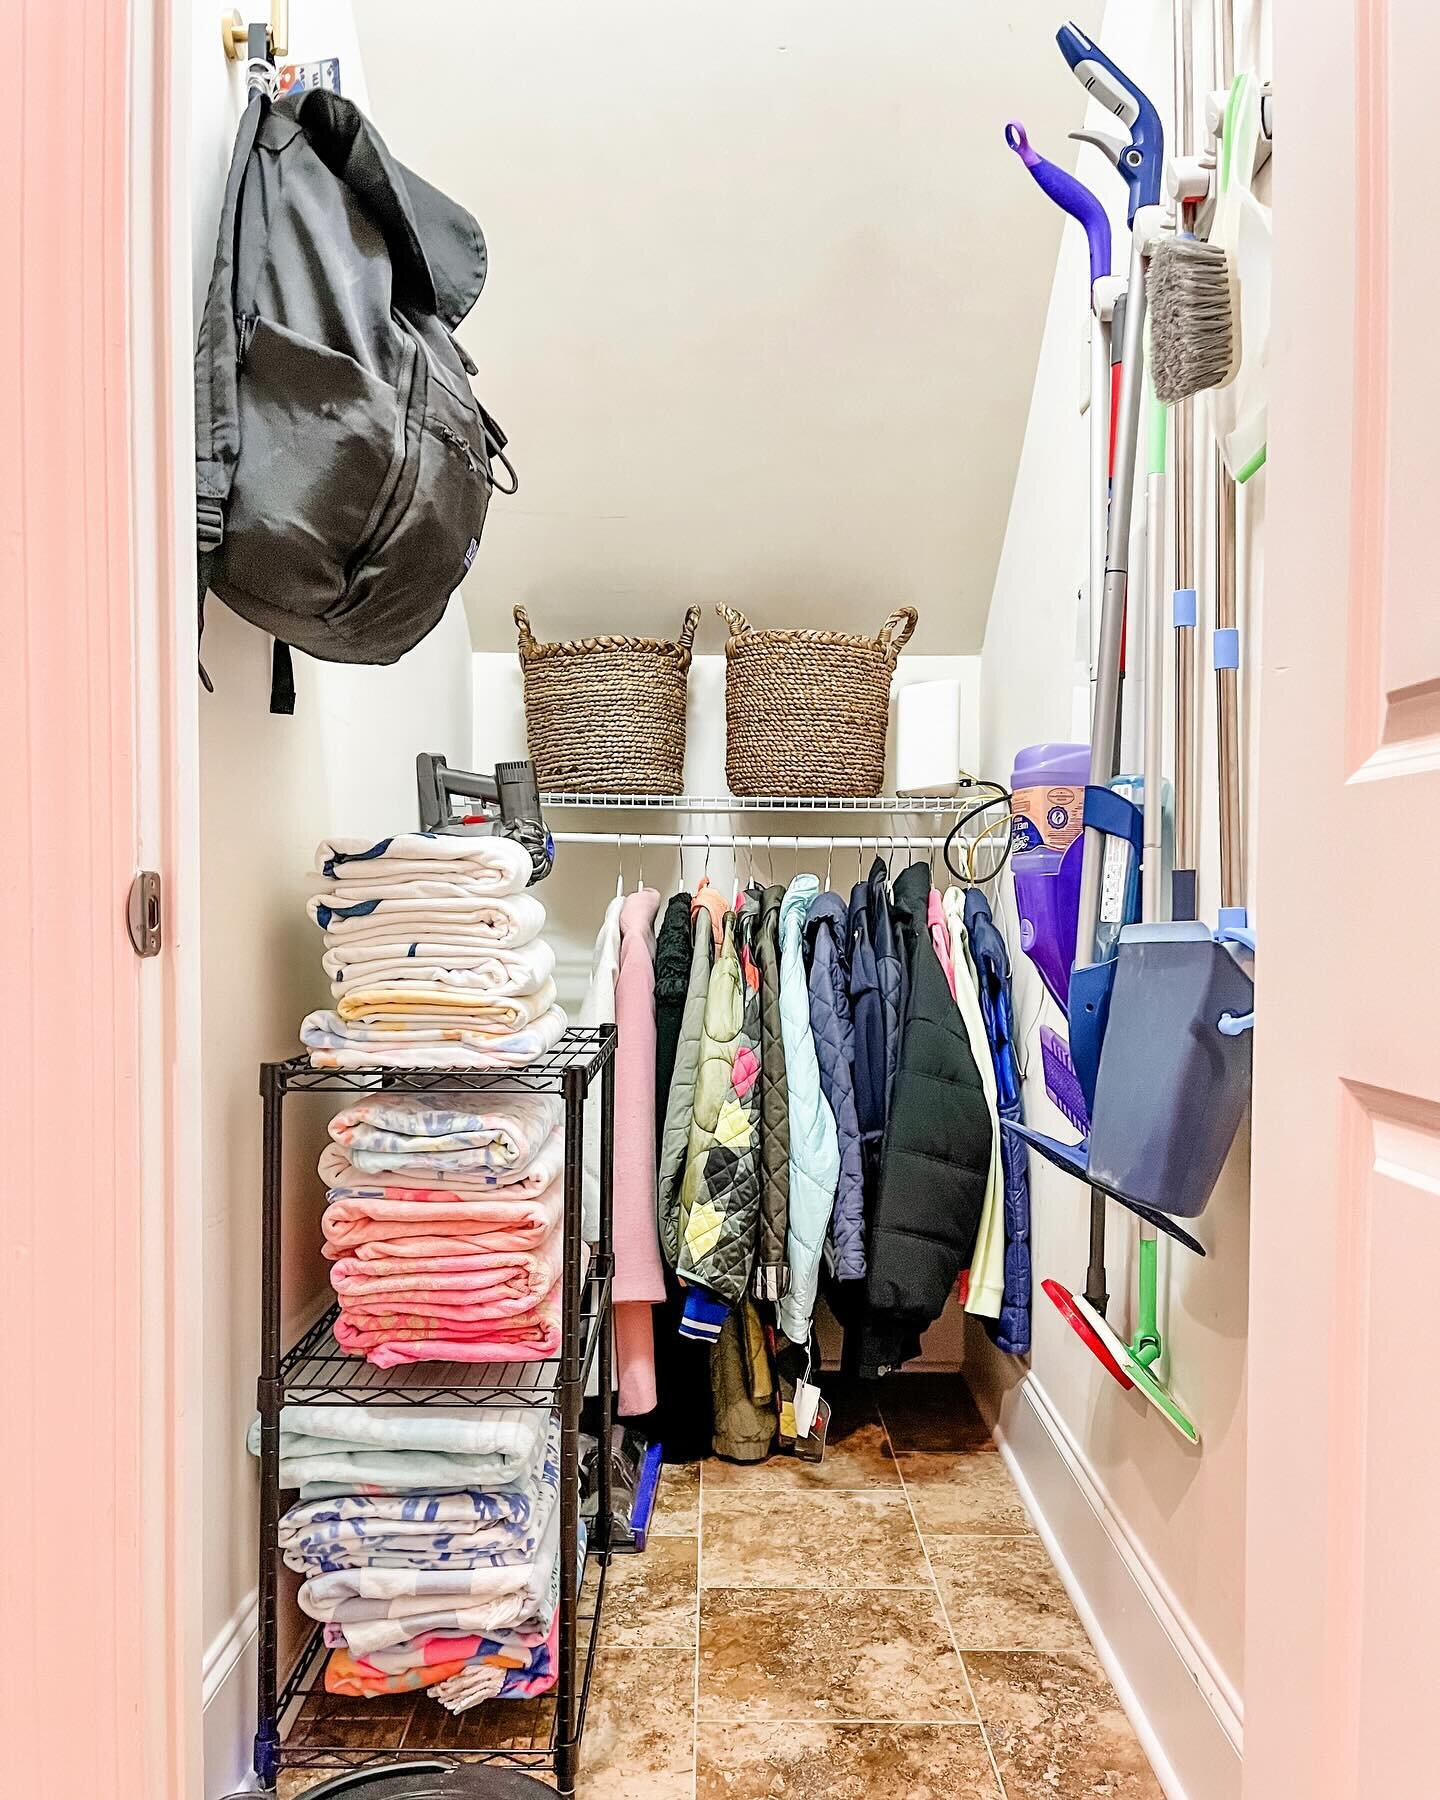 Yesterday on our stories we talked about systems, maximizing space, and making items accessible. This closet was a perfect example of how a better system was needed. 

The storage in this house is quite a bit less than our client was used to in their